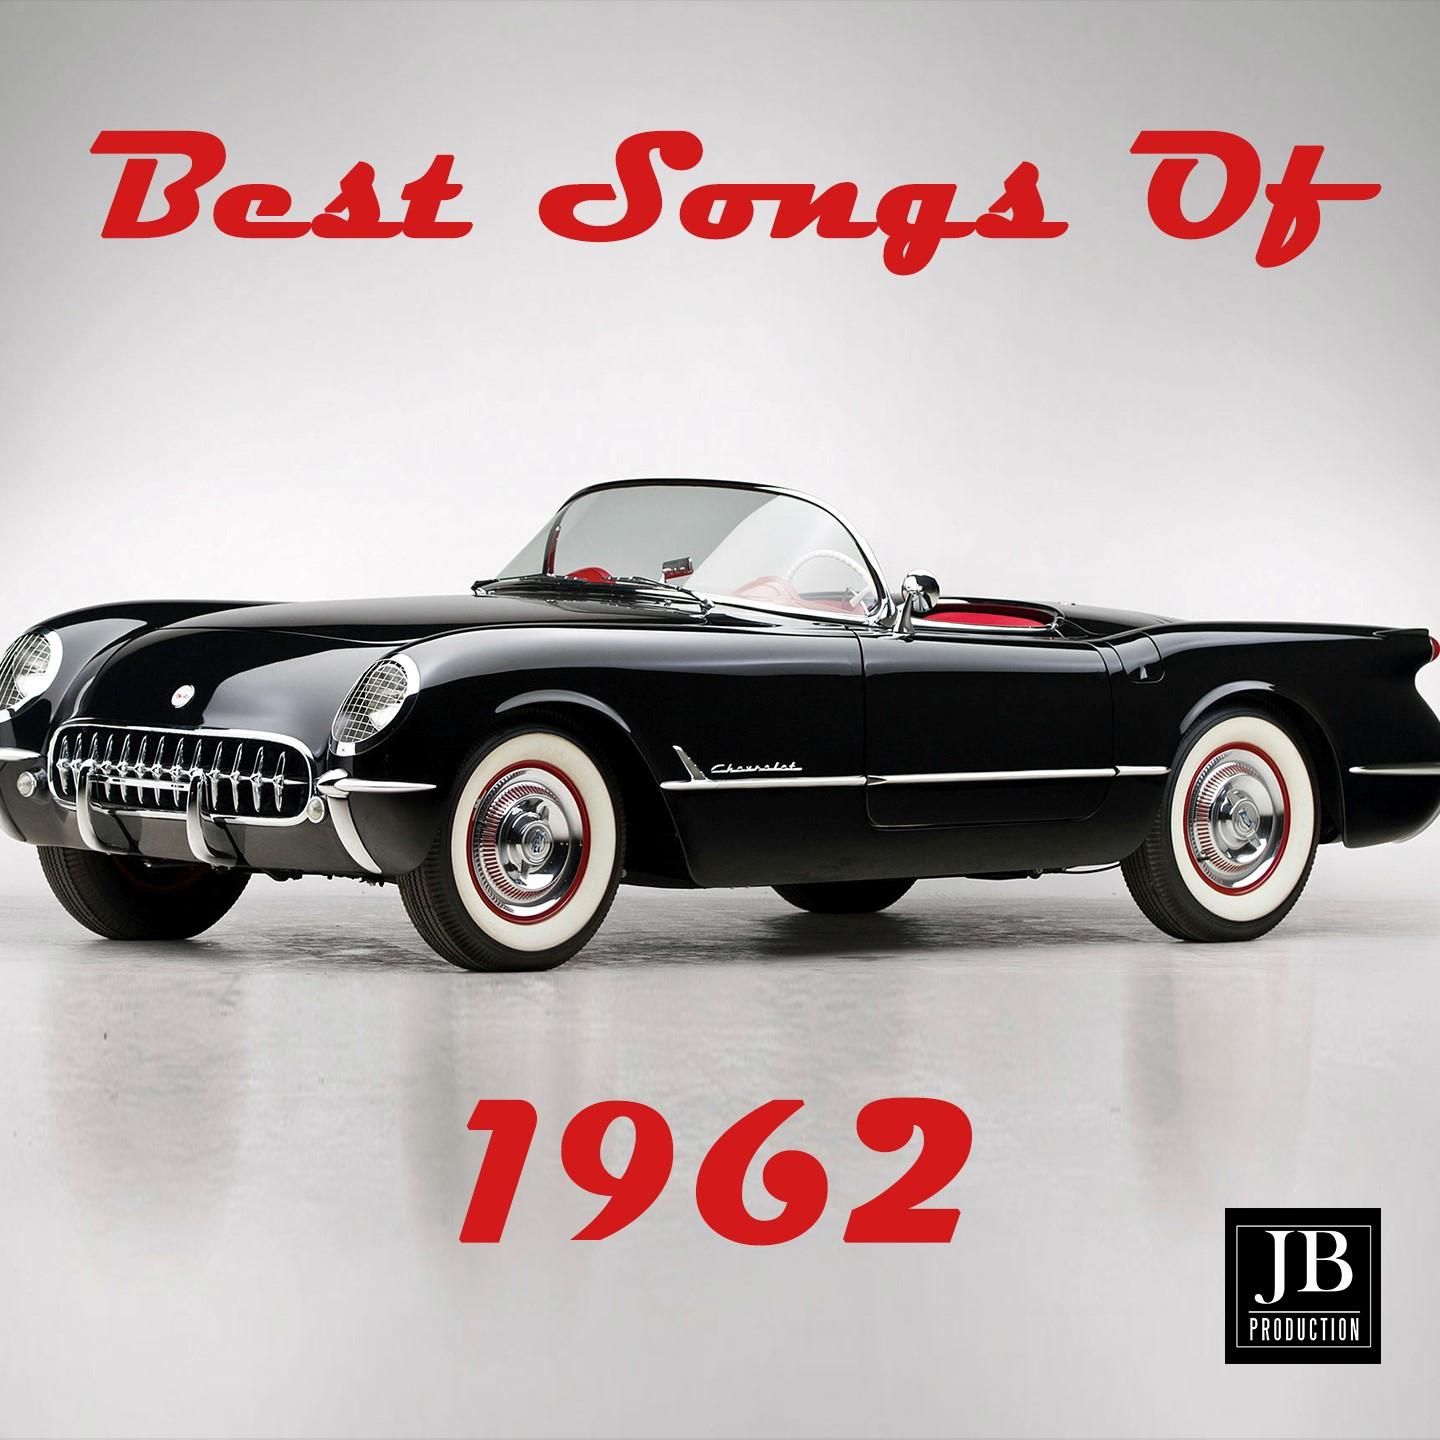 Best Songs of 1962 Medley: Stranger on the Shore / I Can't Stop Loving You / Mashed Potato Time / Roses Are Red / The Stripper / Johnny Angel / The Loco-Motion / Let Me In / The Twist / Soldier Boy / Hey! Baby / The Wanderer